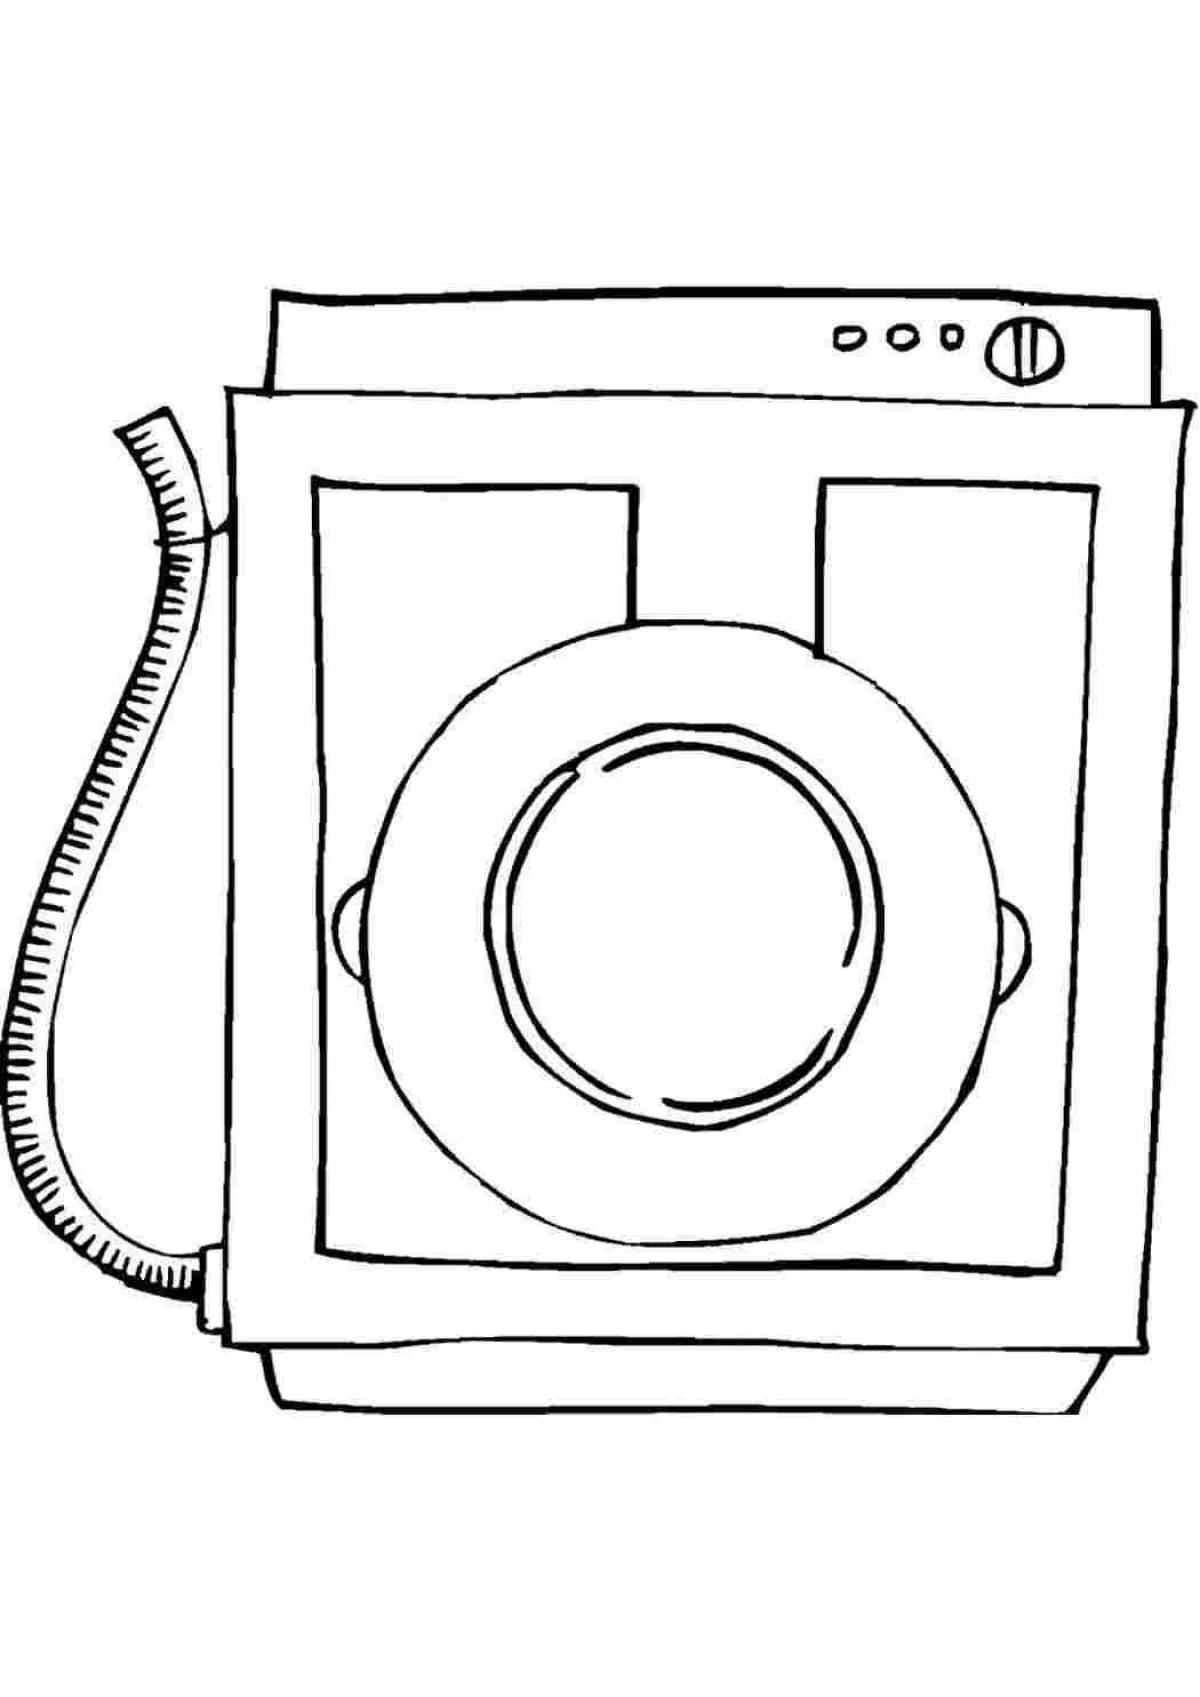 Exquisite baby washing machine coloring page